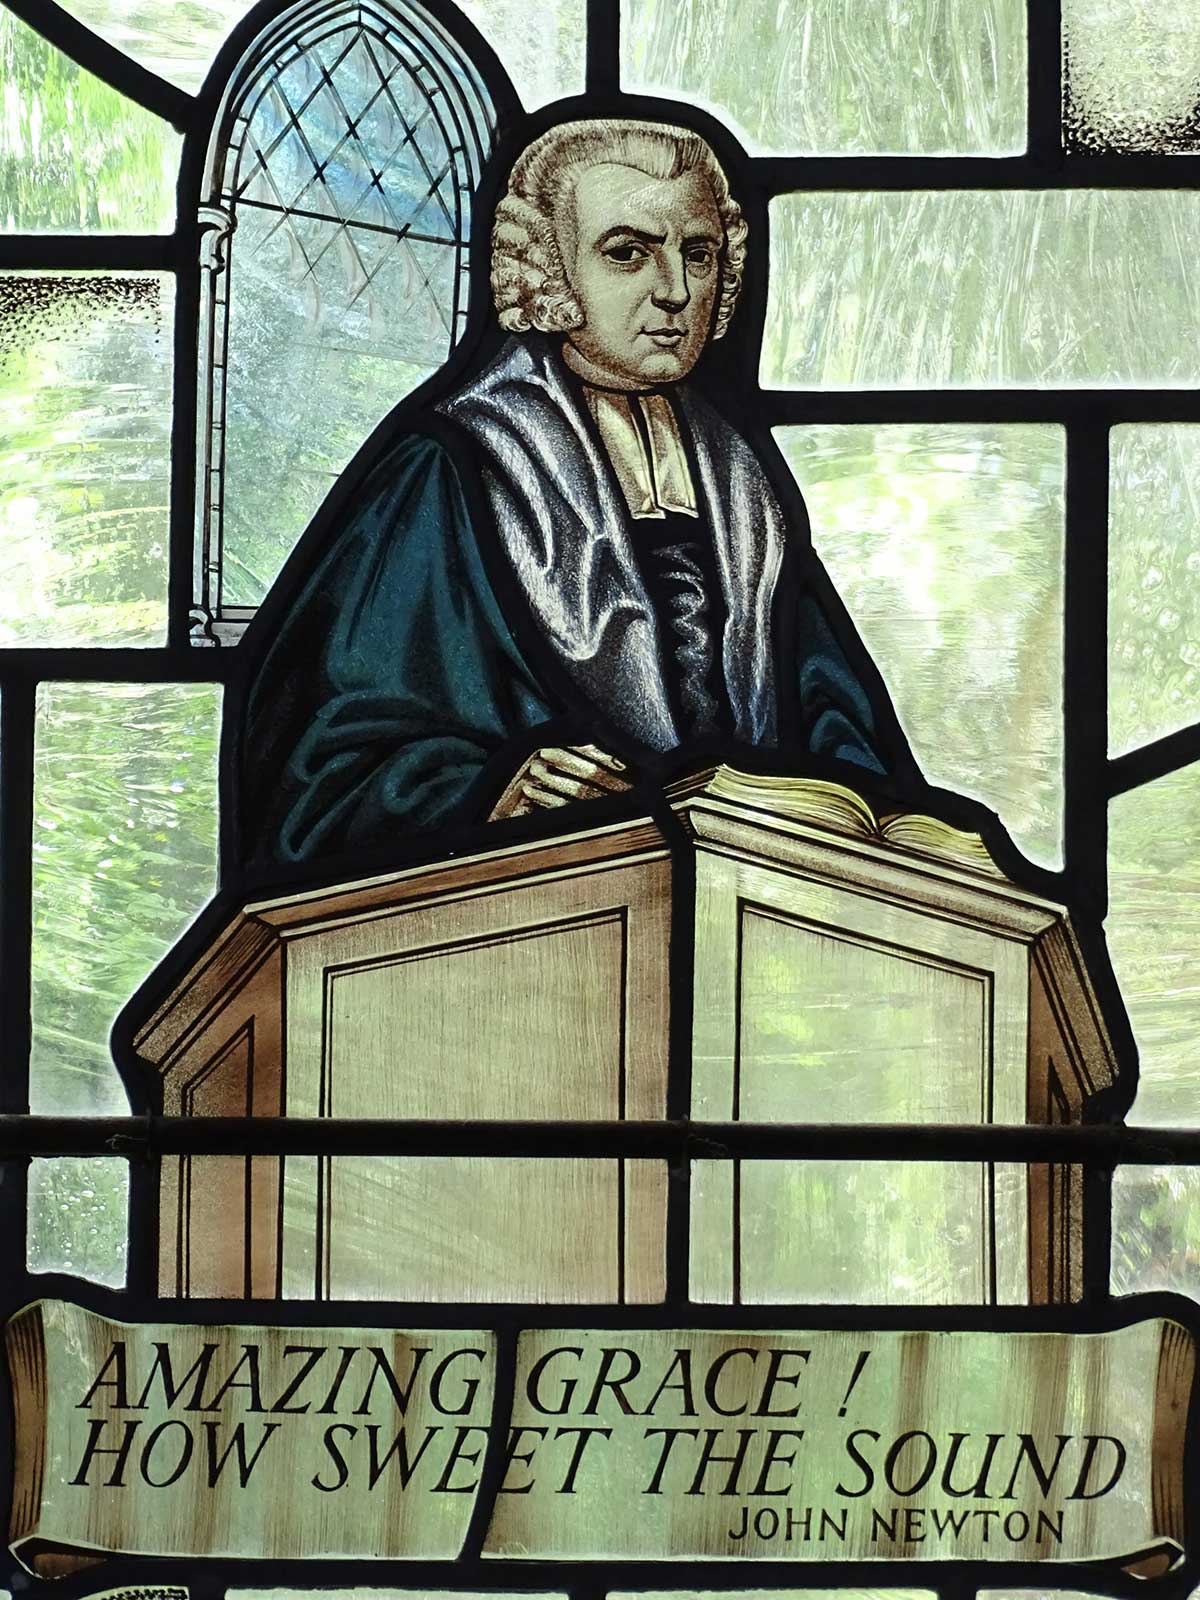 Stained glass of John Newton from Sts. Peter and Paul Church, Buckinghamshire, England. Photo: Wikimedia Commons